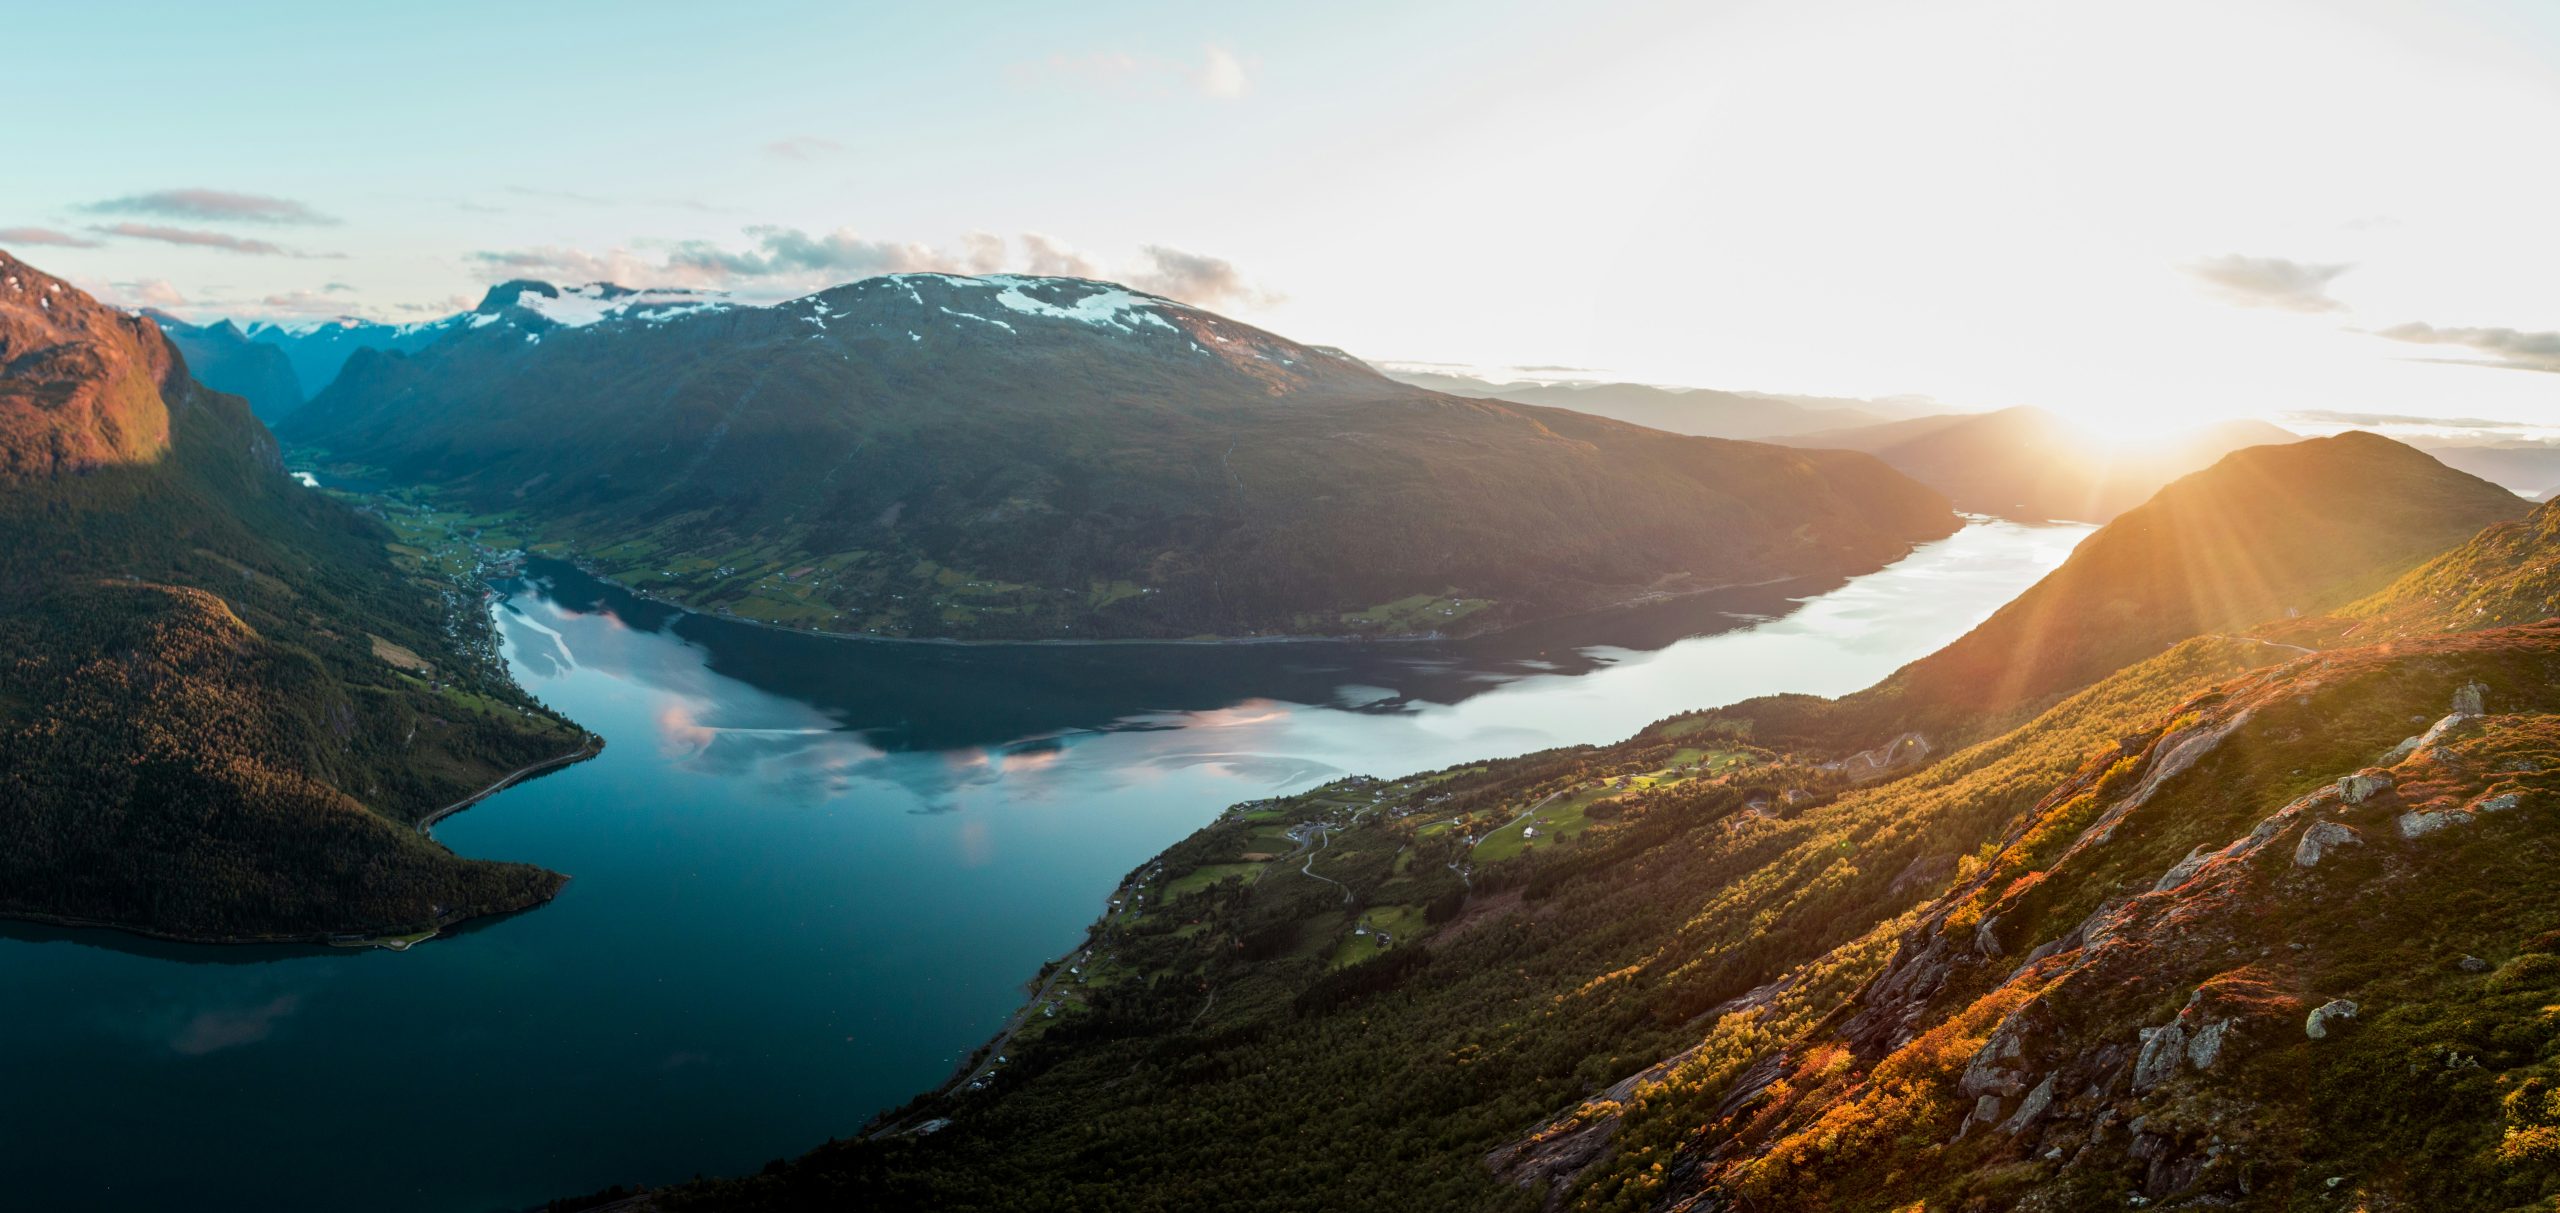 explore the breathtaking fjords and stunning natural beauty of norway with our fjords tours and travel packages.